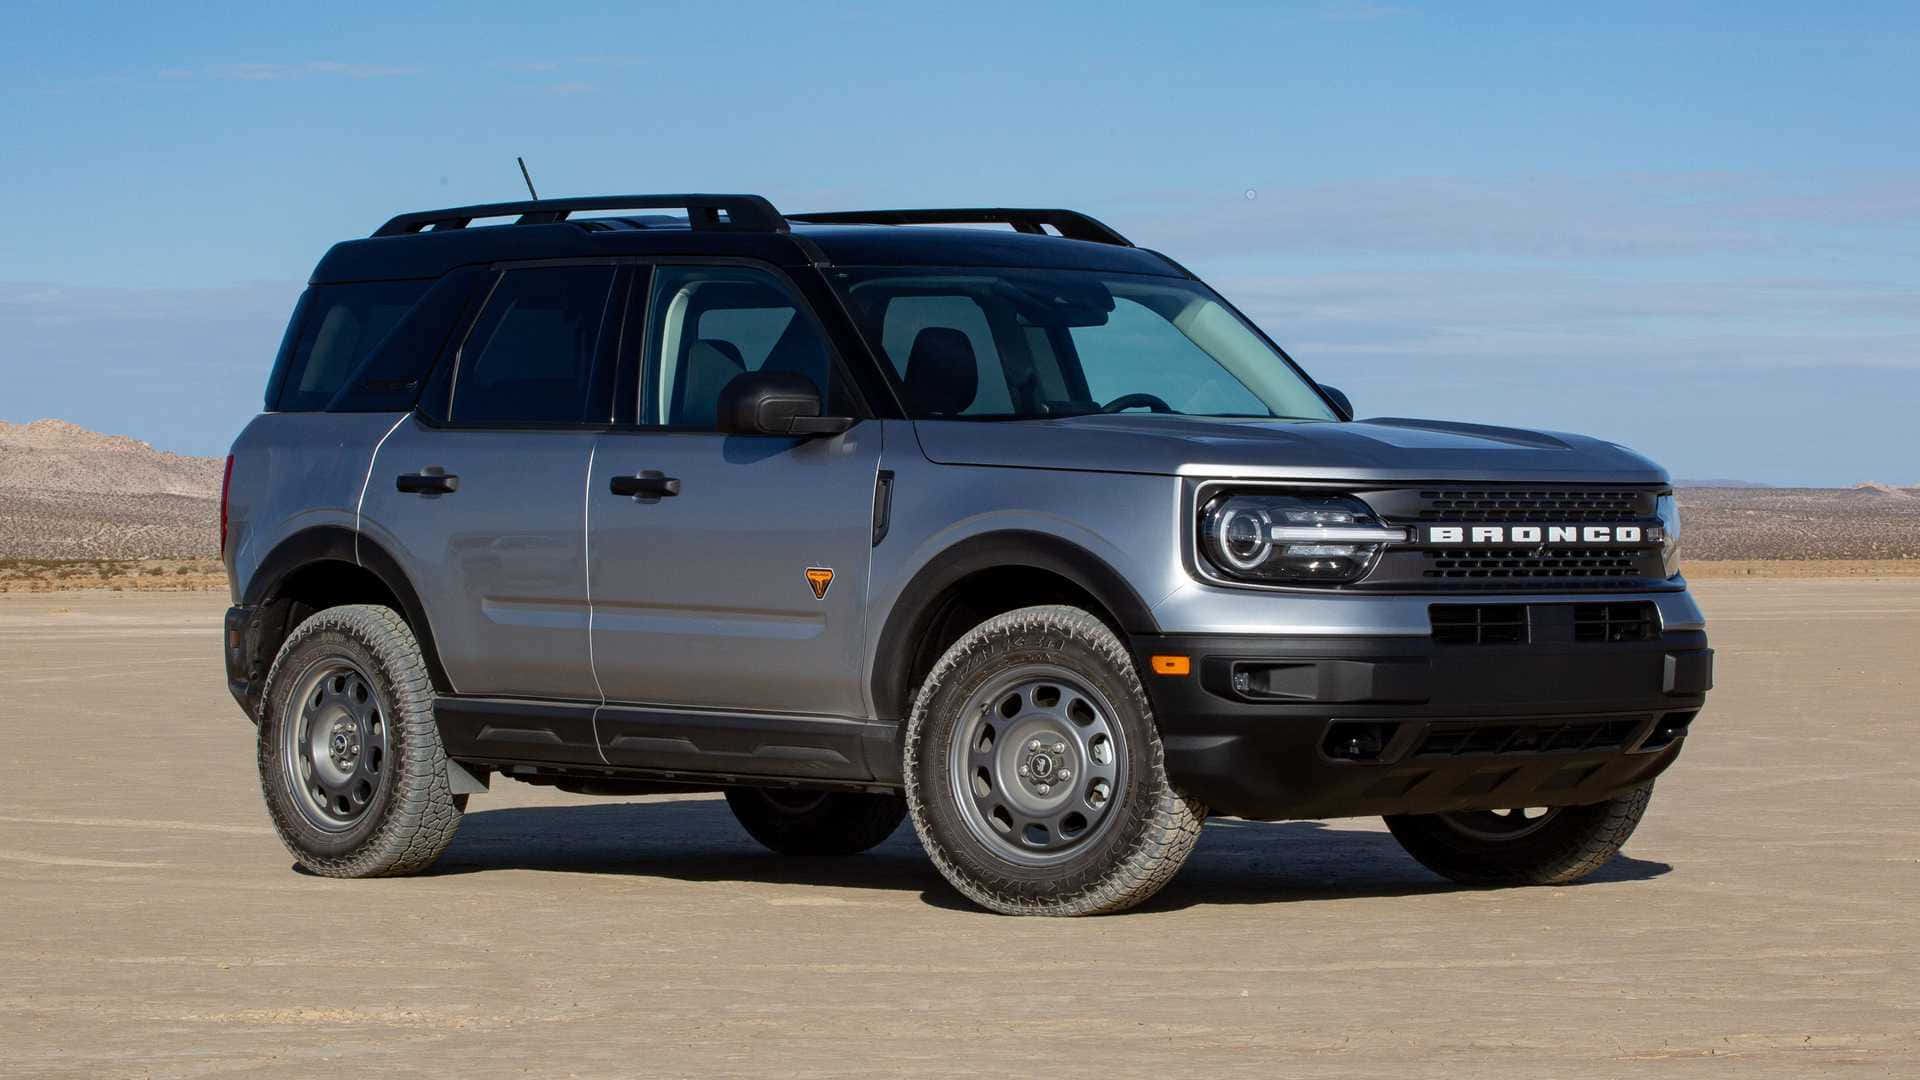 Stylish and Rugged - Ford Bronco